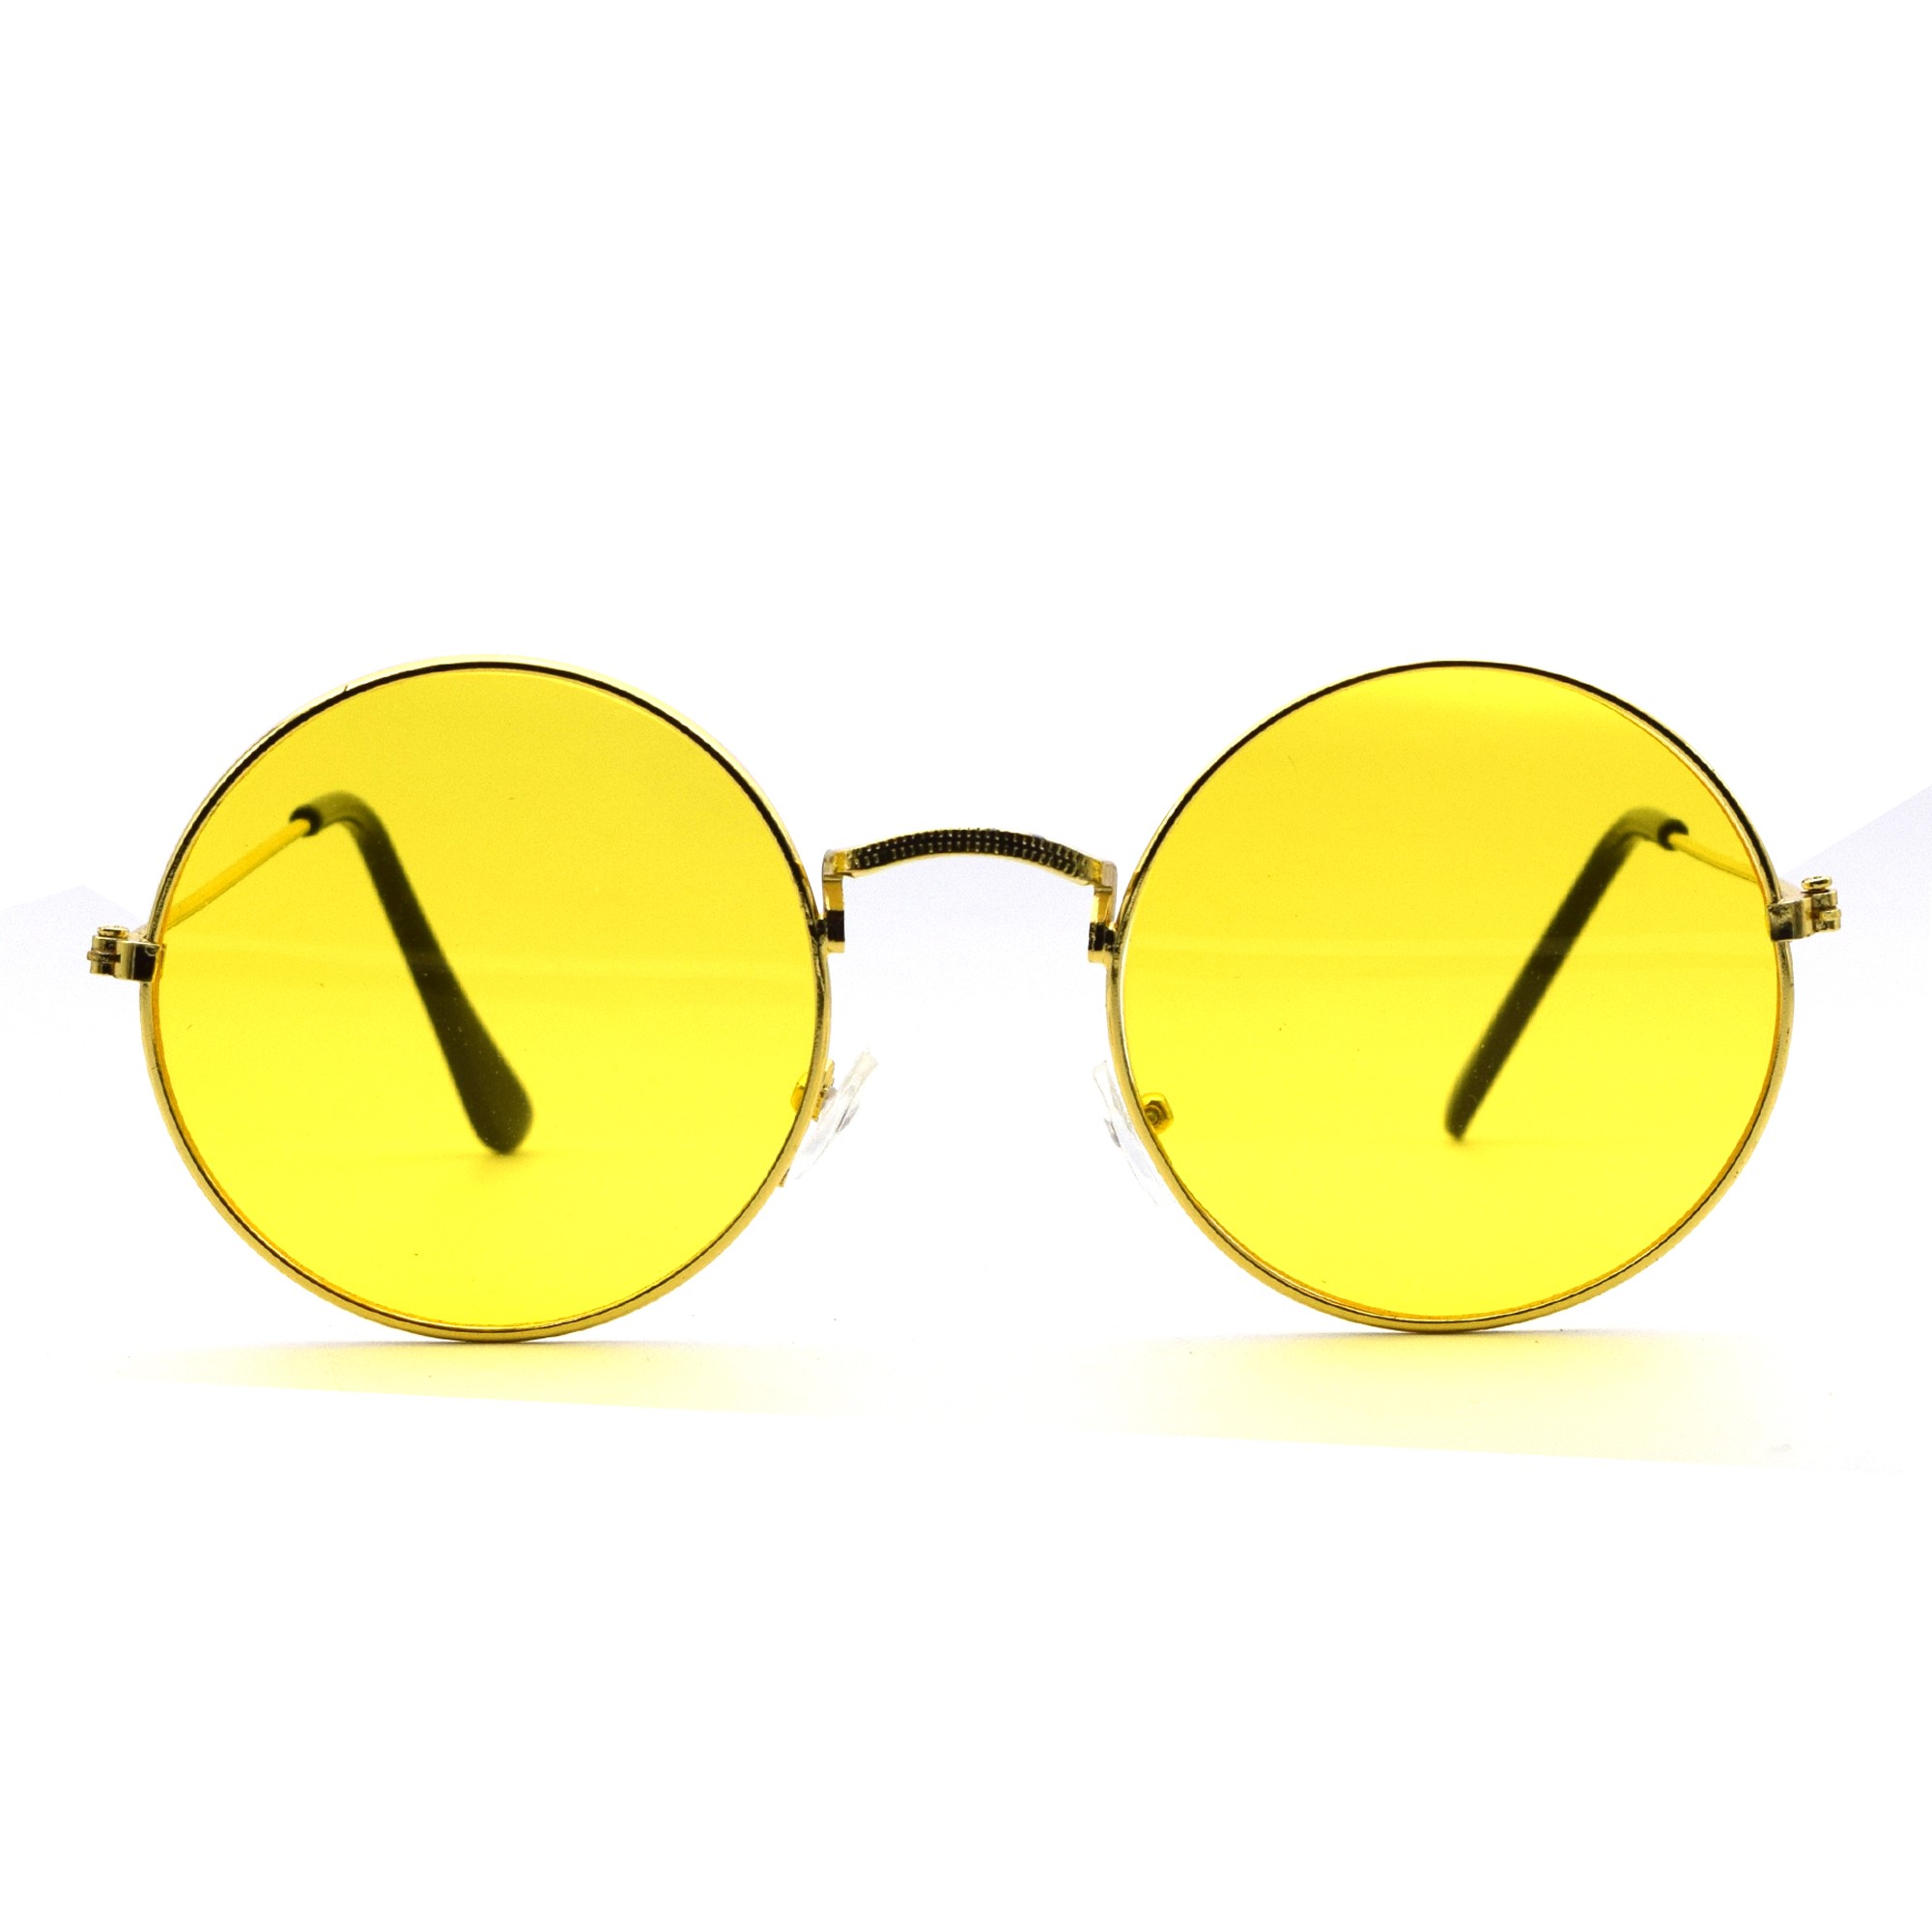 Cool Round Sunglasses - Blue and Gold Sunglasses - $15.00 - Lulus